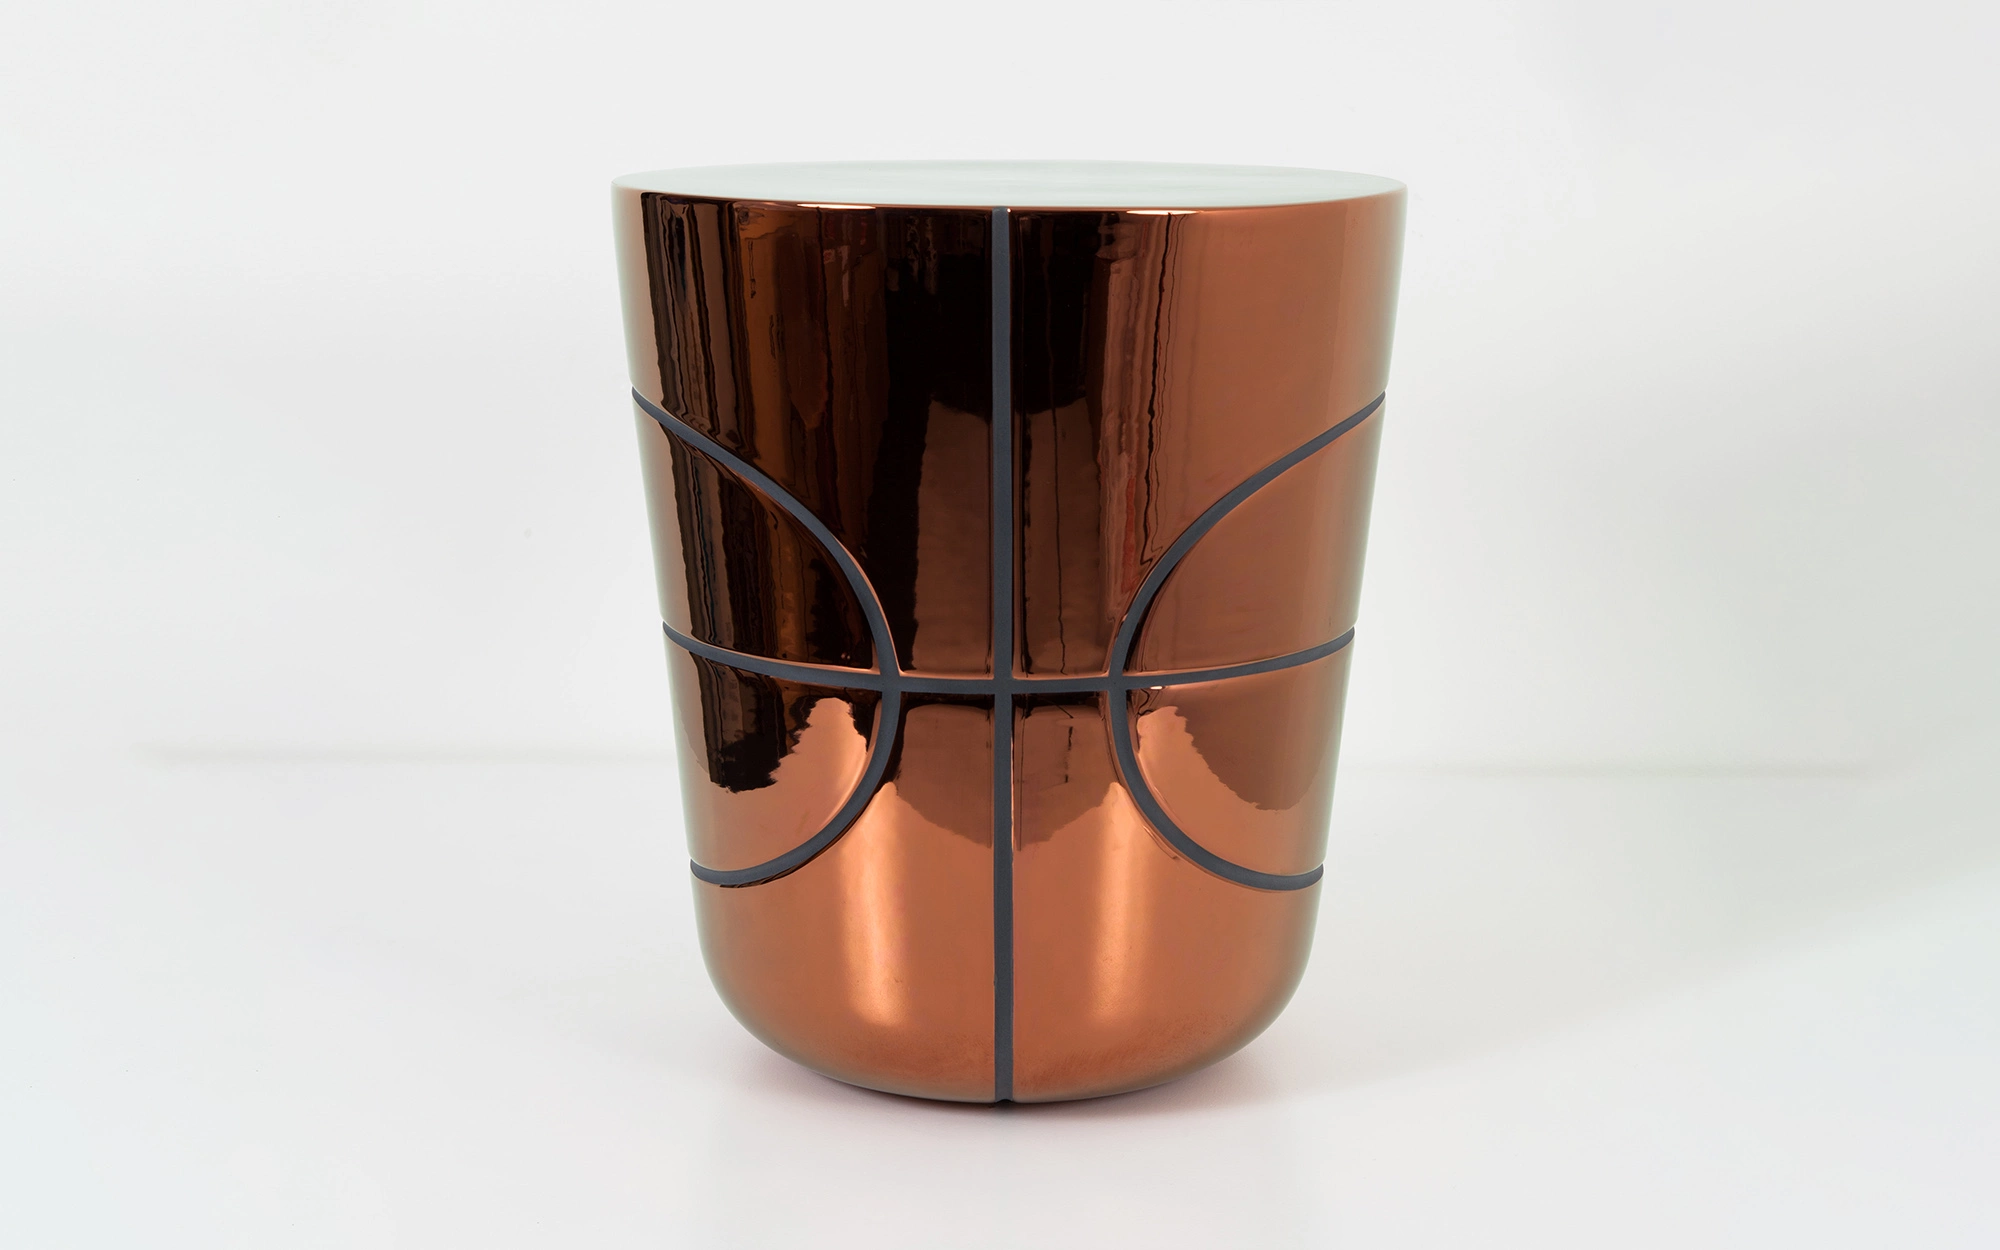 Game On Side Table - Copper Ceramic - Jaime Hayon - Coffee table - Galerie kreo